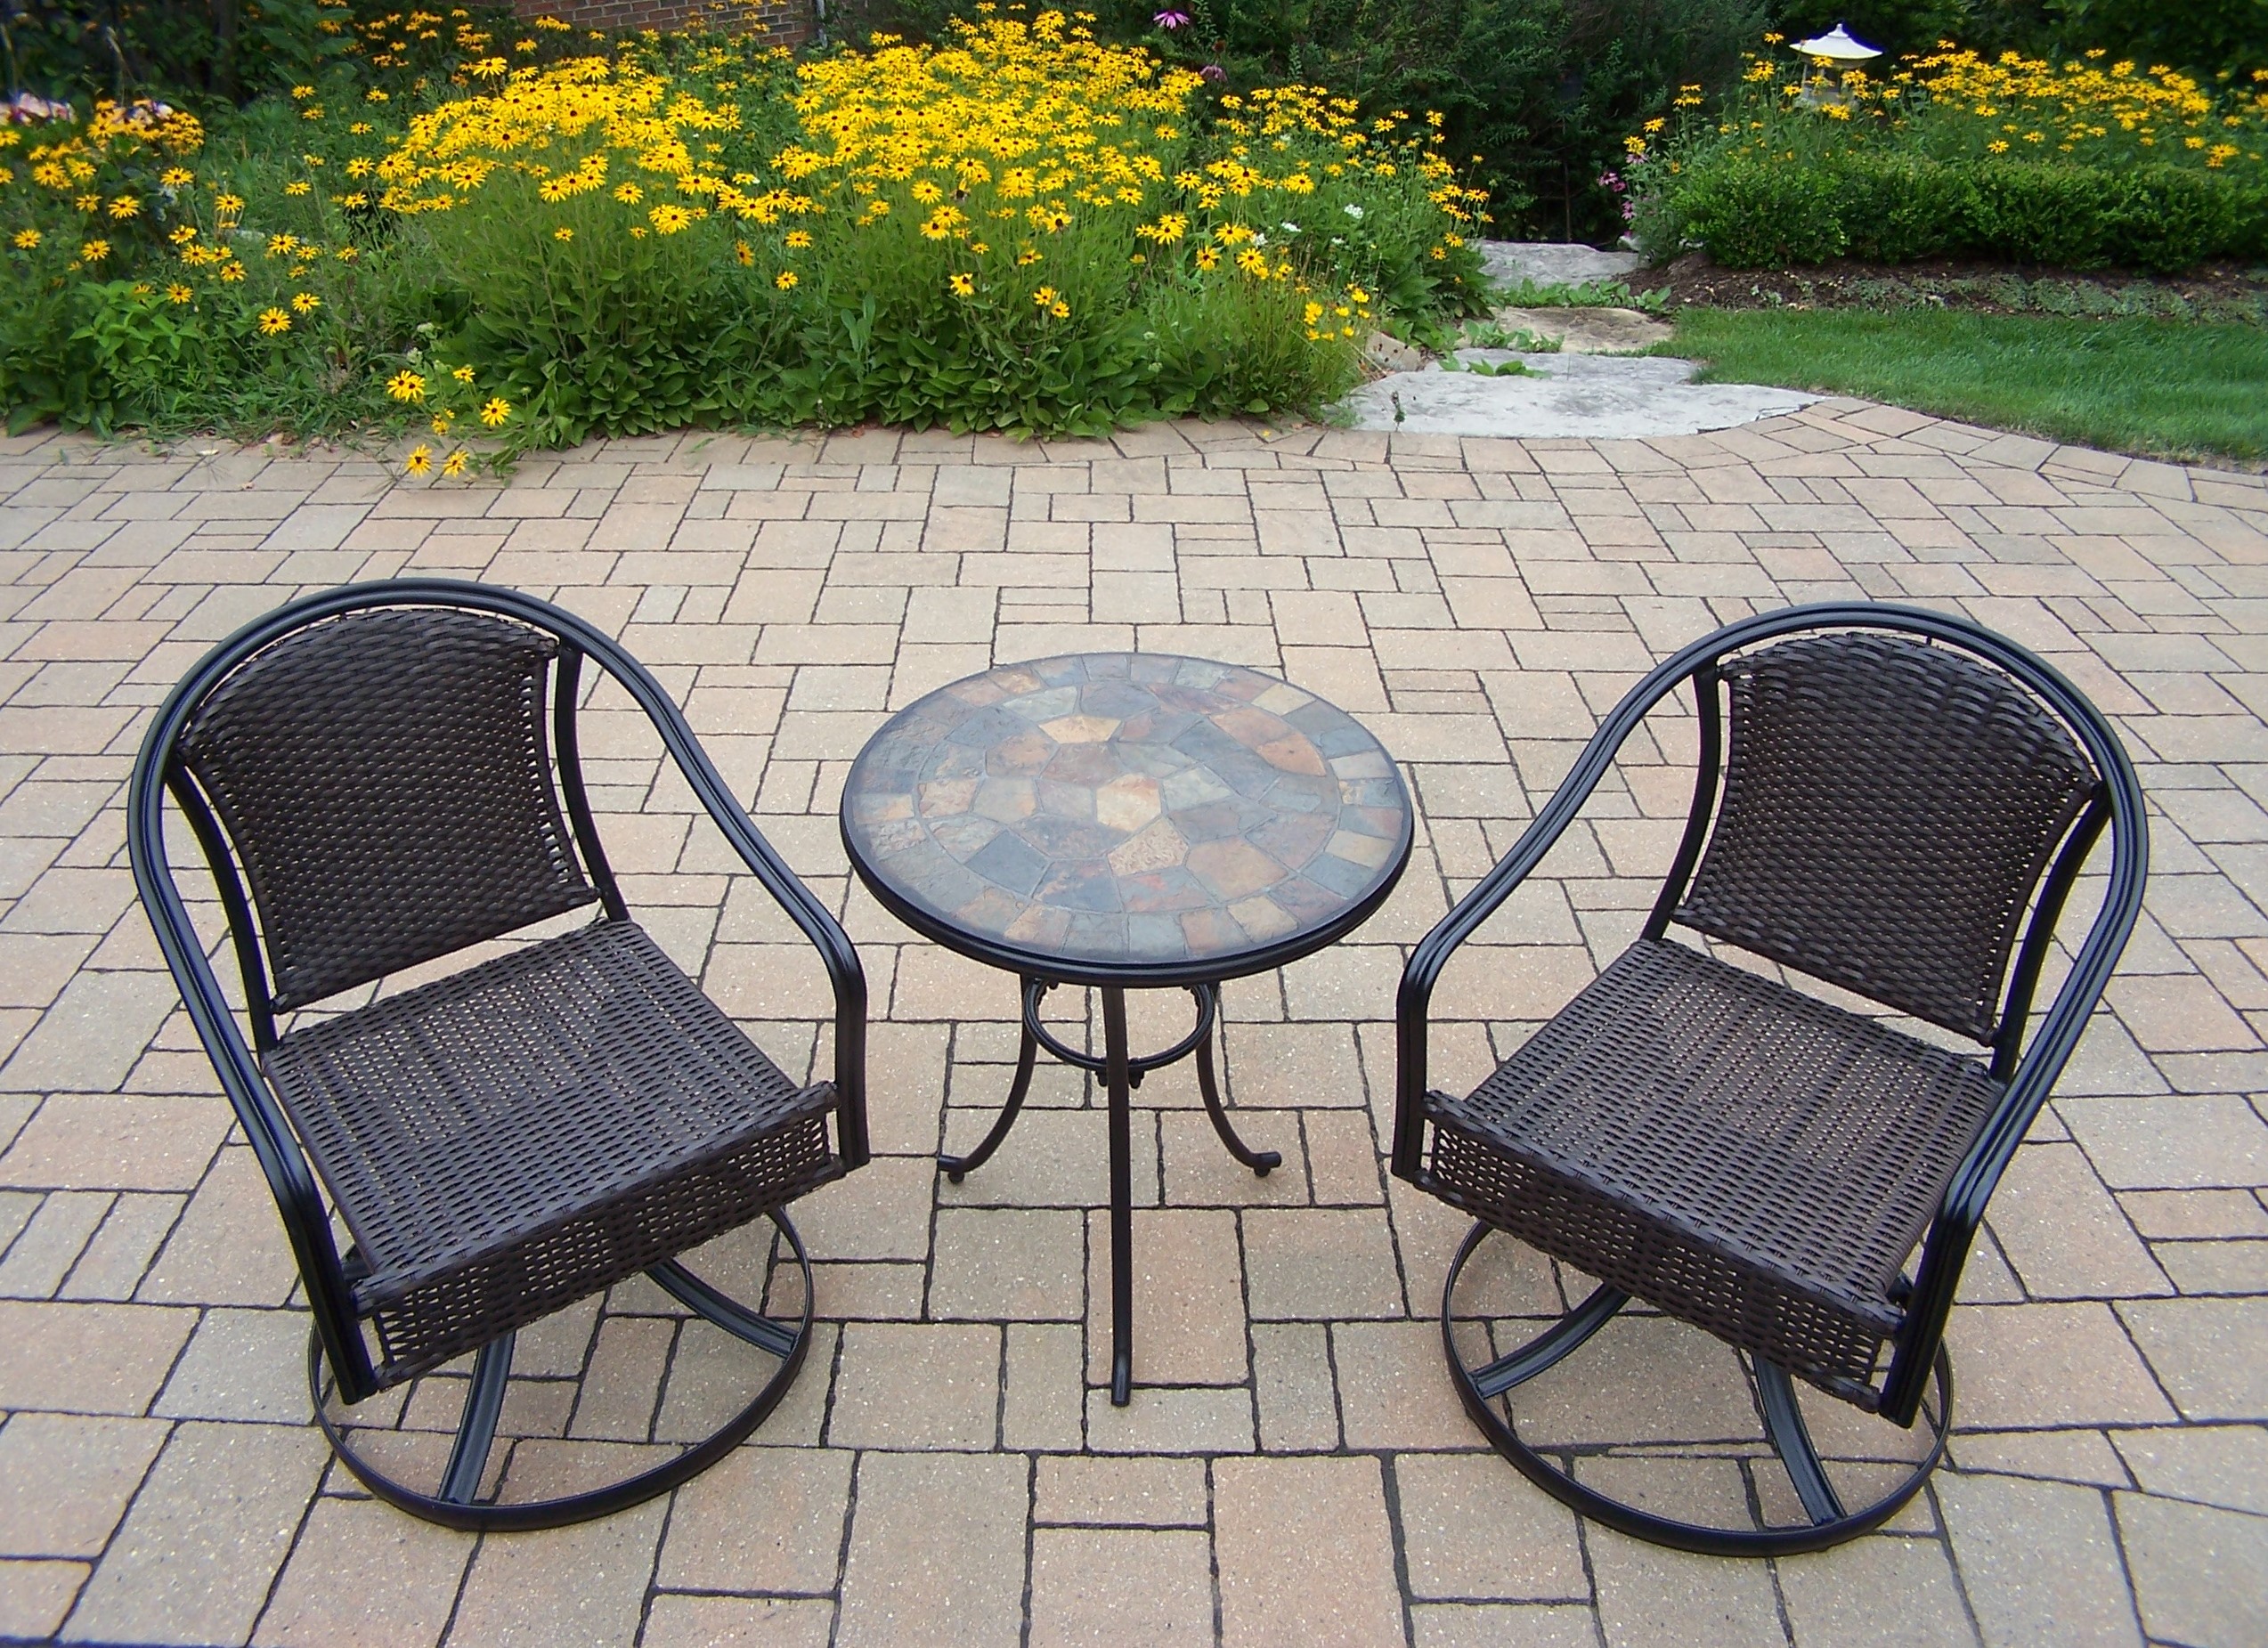 Stone Art 3 Pc. Bistro Set w/ 24-inch Table and 2 Swivel woven wicker chairs